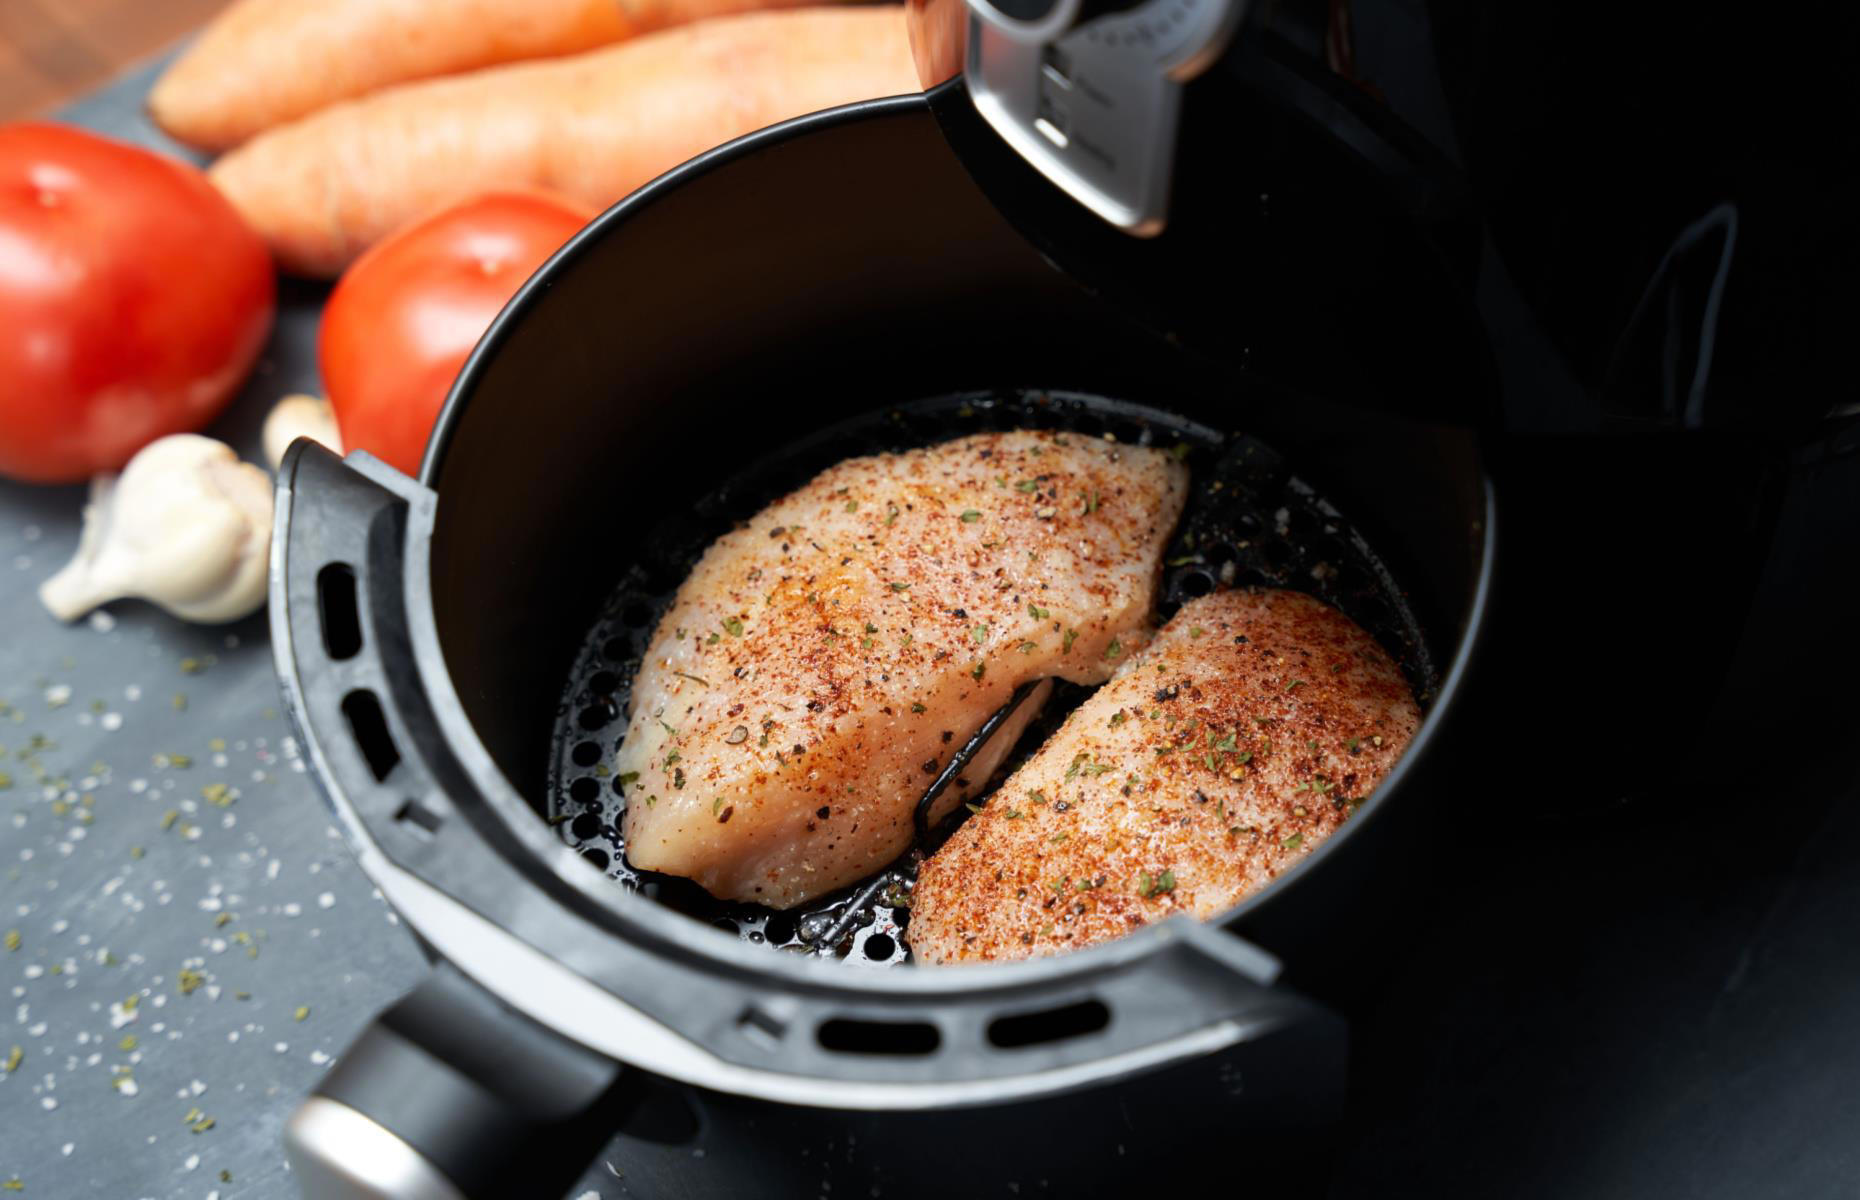 This Is the #1 Mistake to Avoid When Using an Air Fryer, According to TikTok